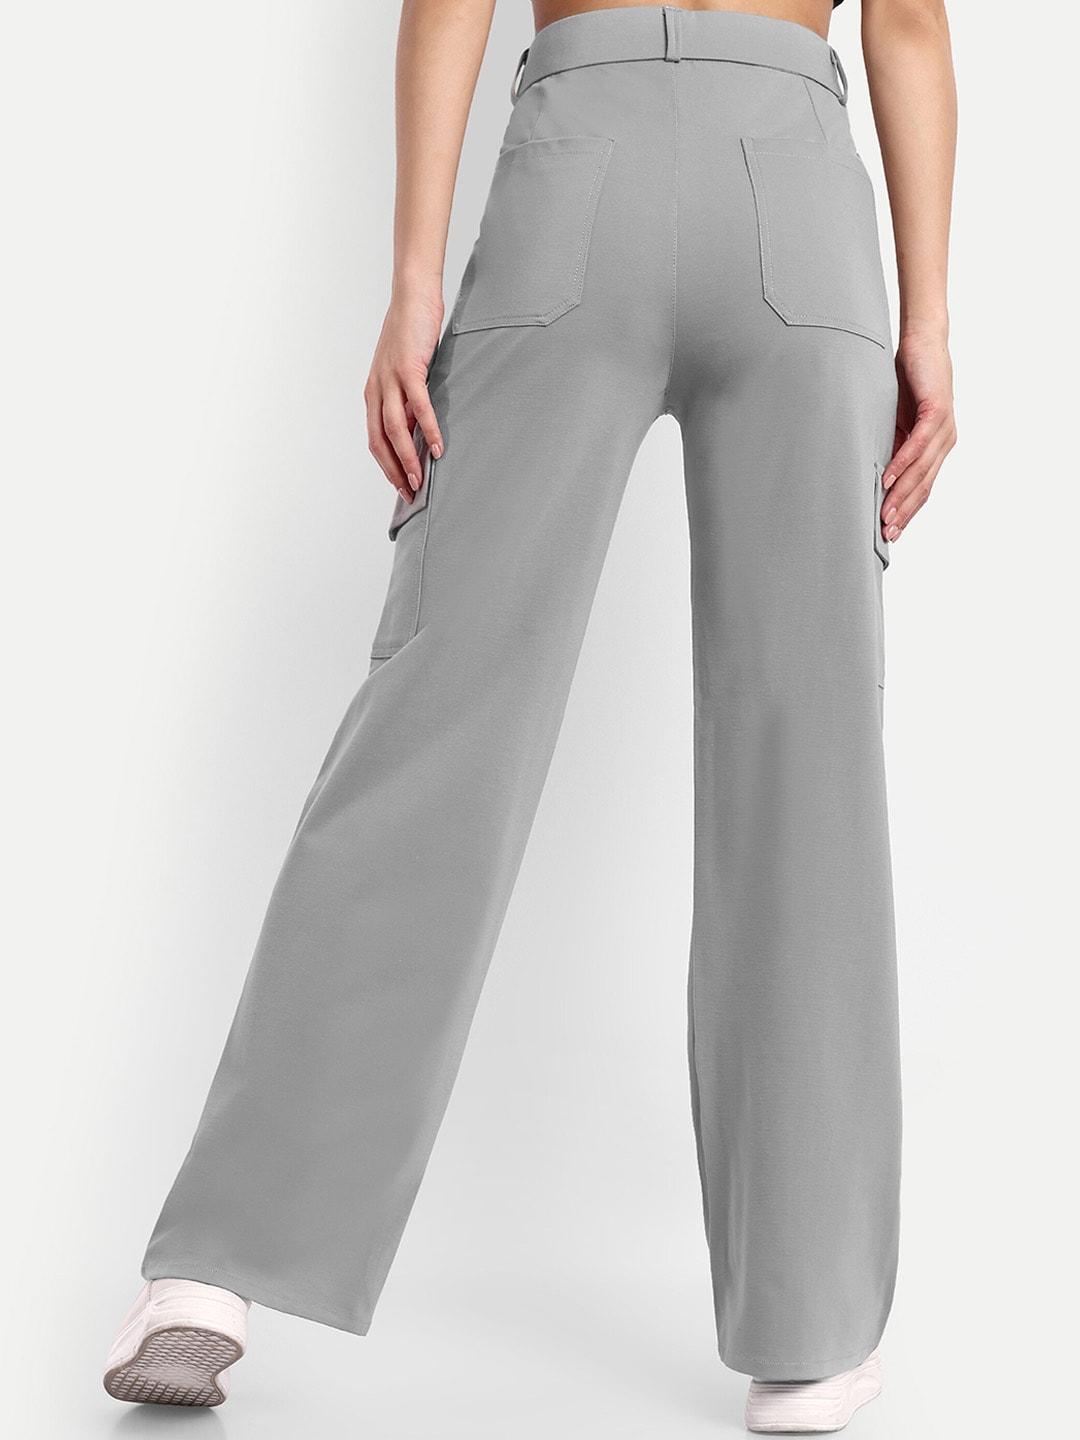 next-one-women-smart-straight-fit-high-rise-easy-wash-stretchable-trousers